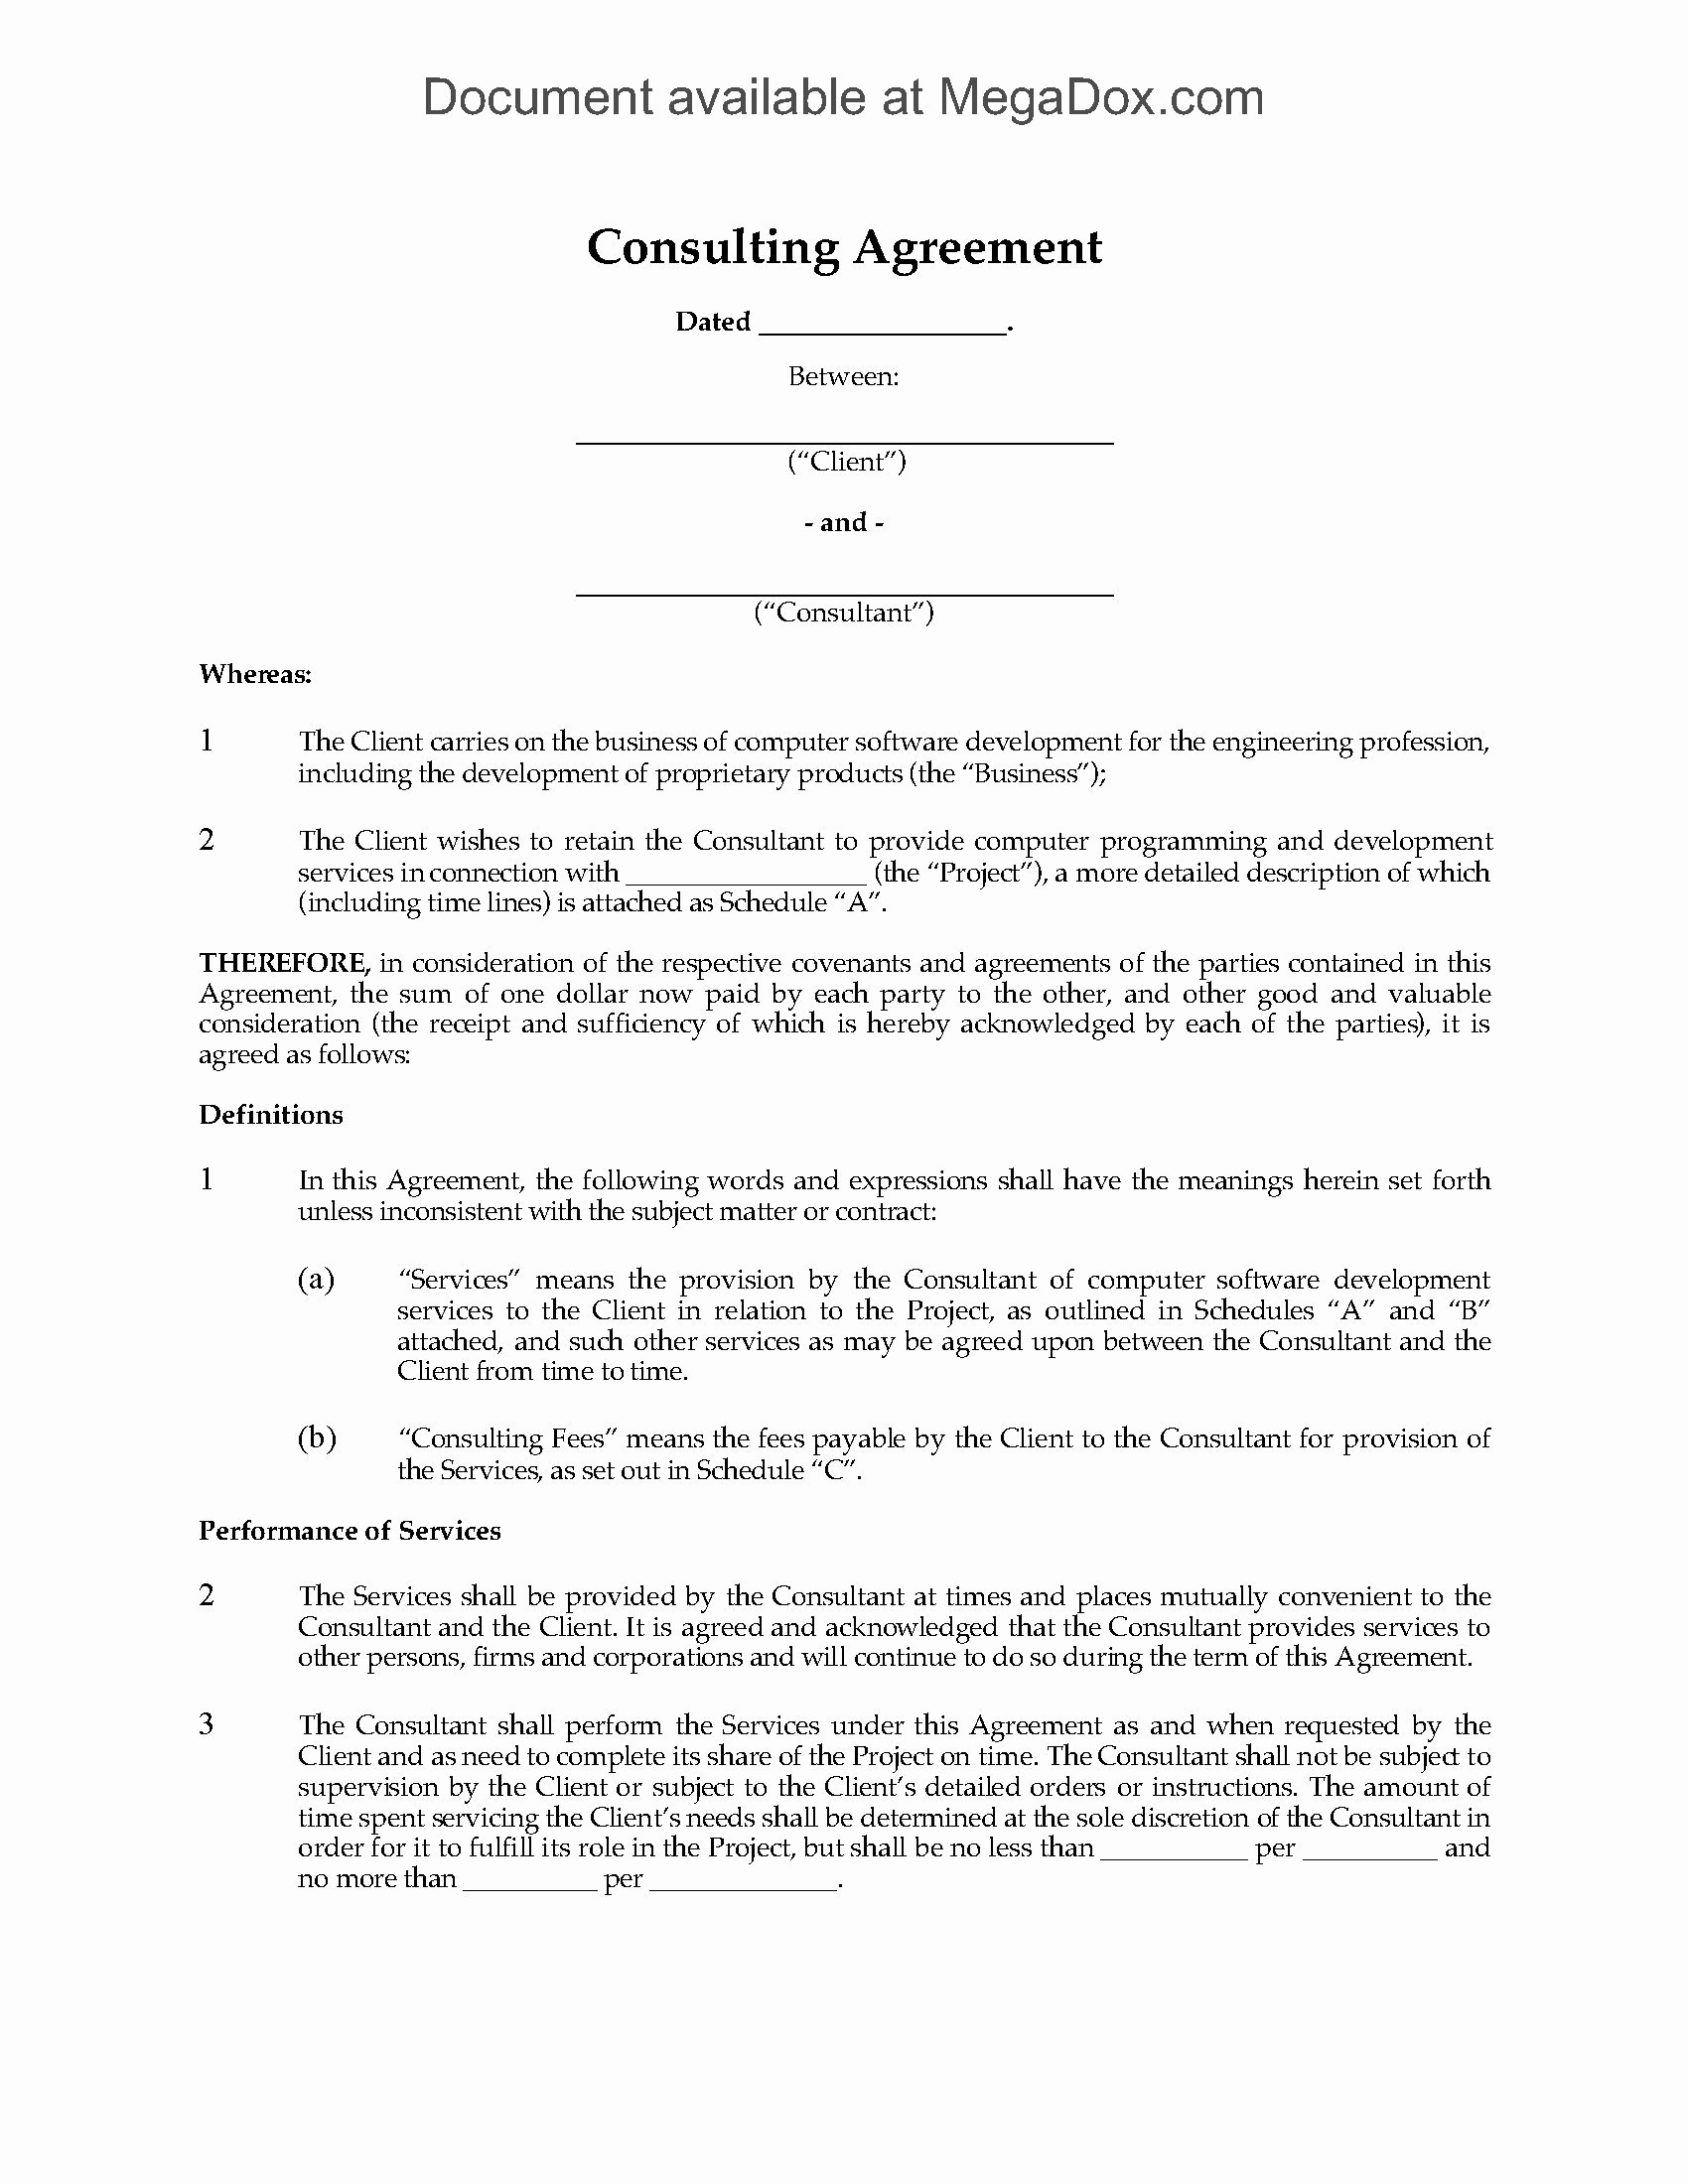 Simple Consulting Agreement Template Fresh Freelance Consultant Contract Template Marketing social